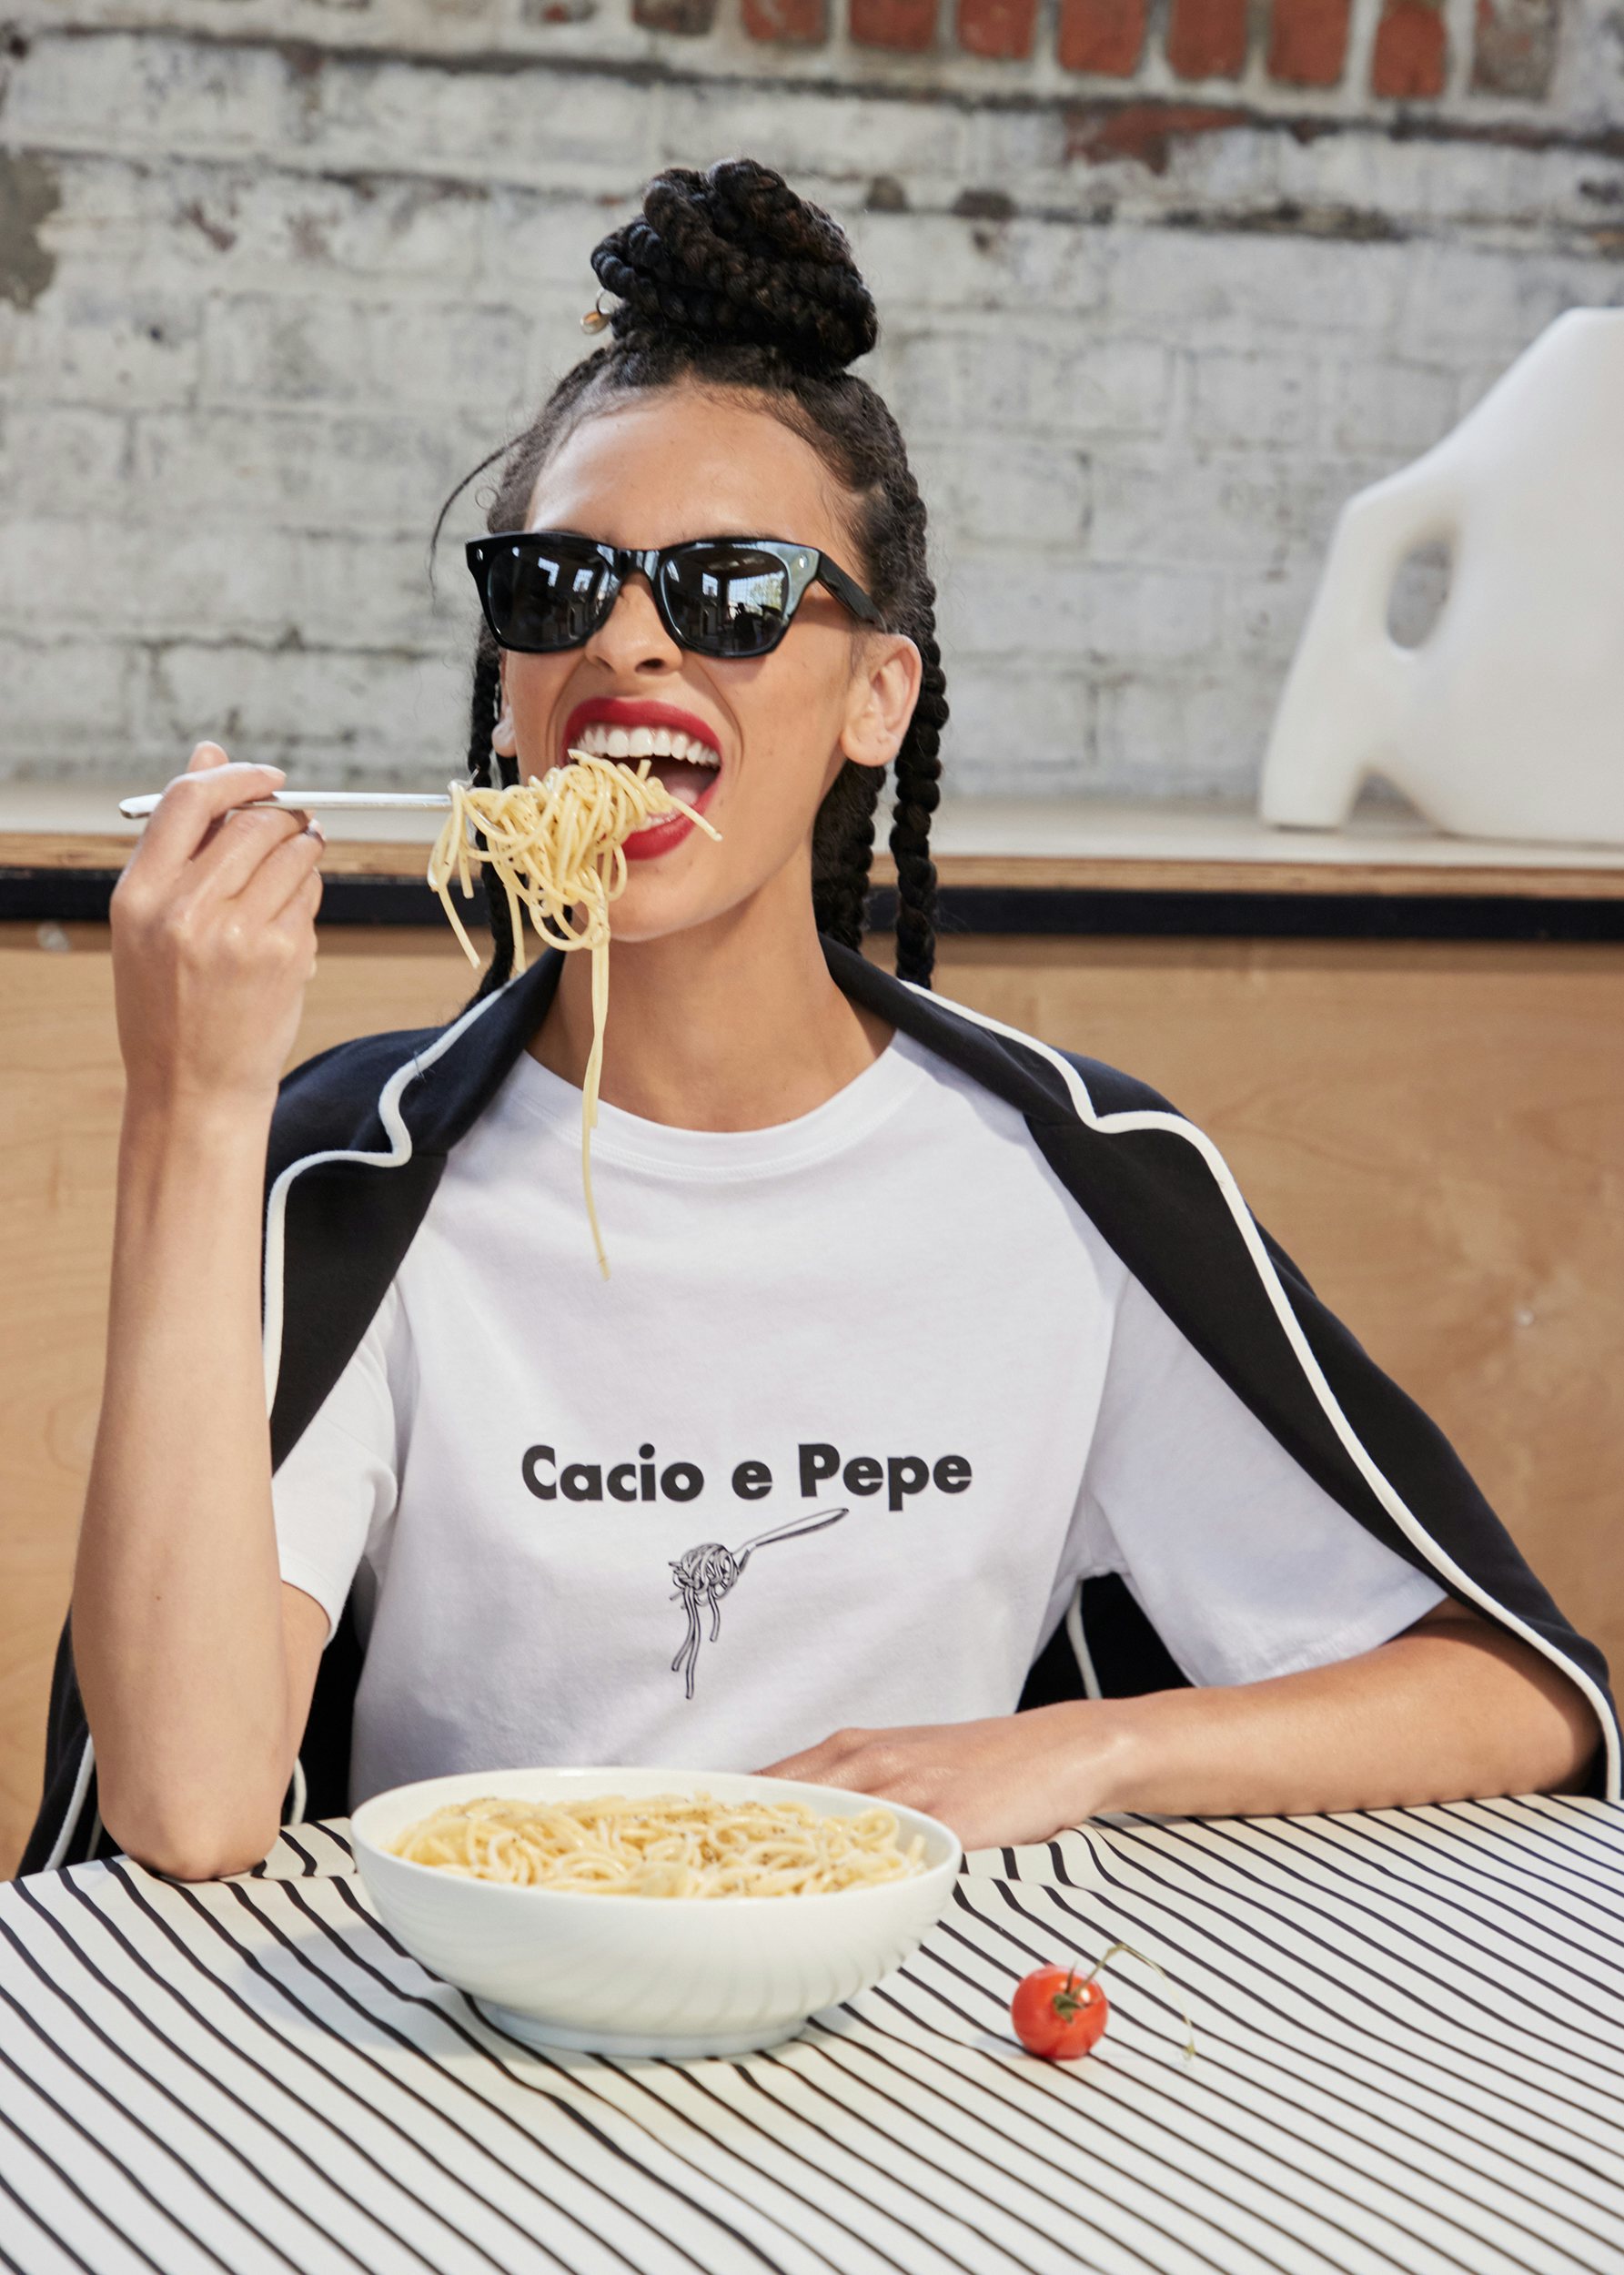 A KULE model having fun eating Cacio e Pepe. She is wearing our new Modern White Cacio e Pepe printed/graphic tee. Layered on top is the new Syd Jacket in black. She is sporting black sunglasses. Hungry for Italian anyone?